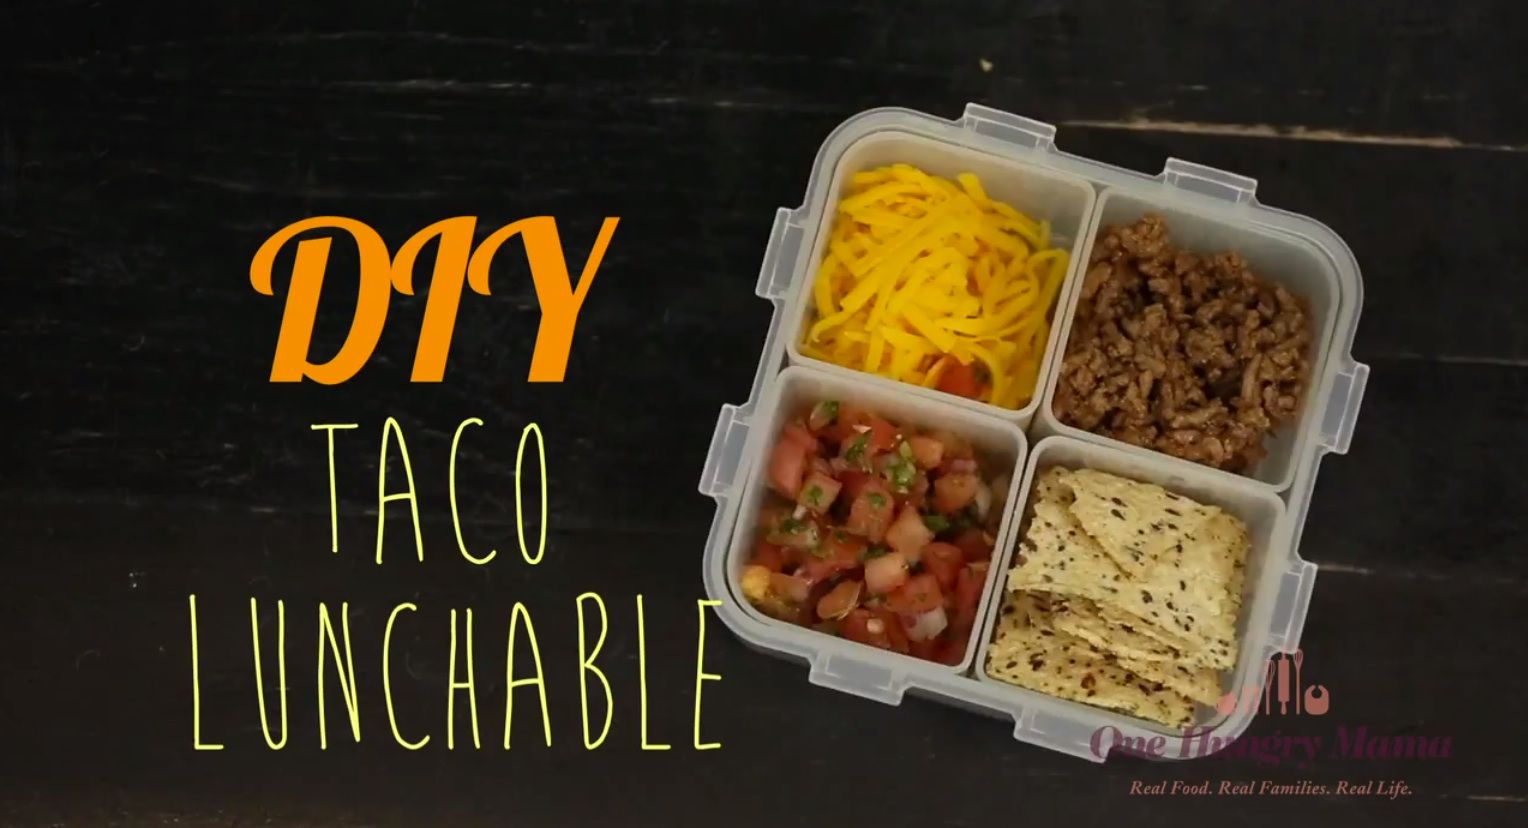 School lunch ideas: One Hungry Mama video tips on YouTube